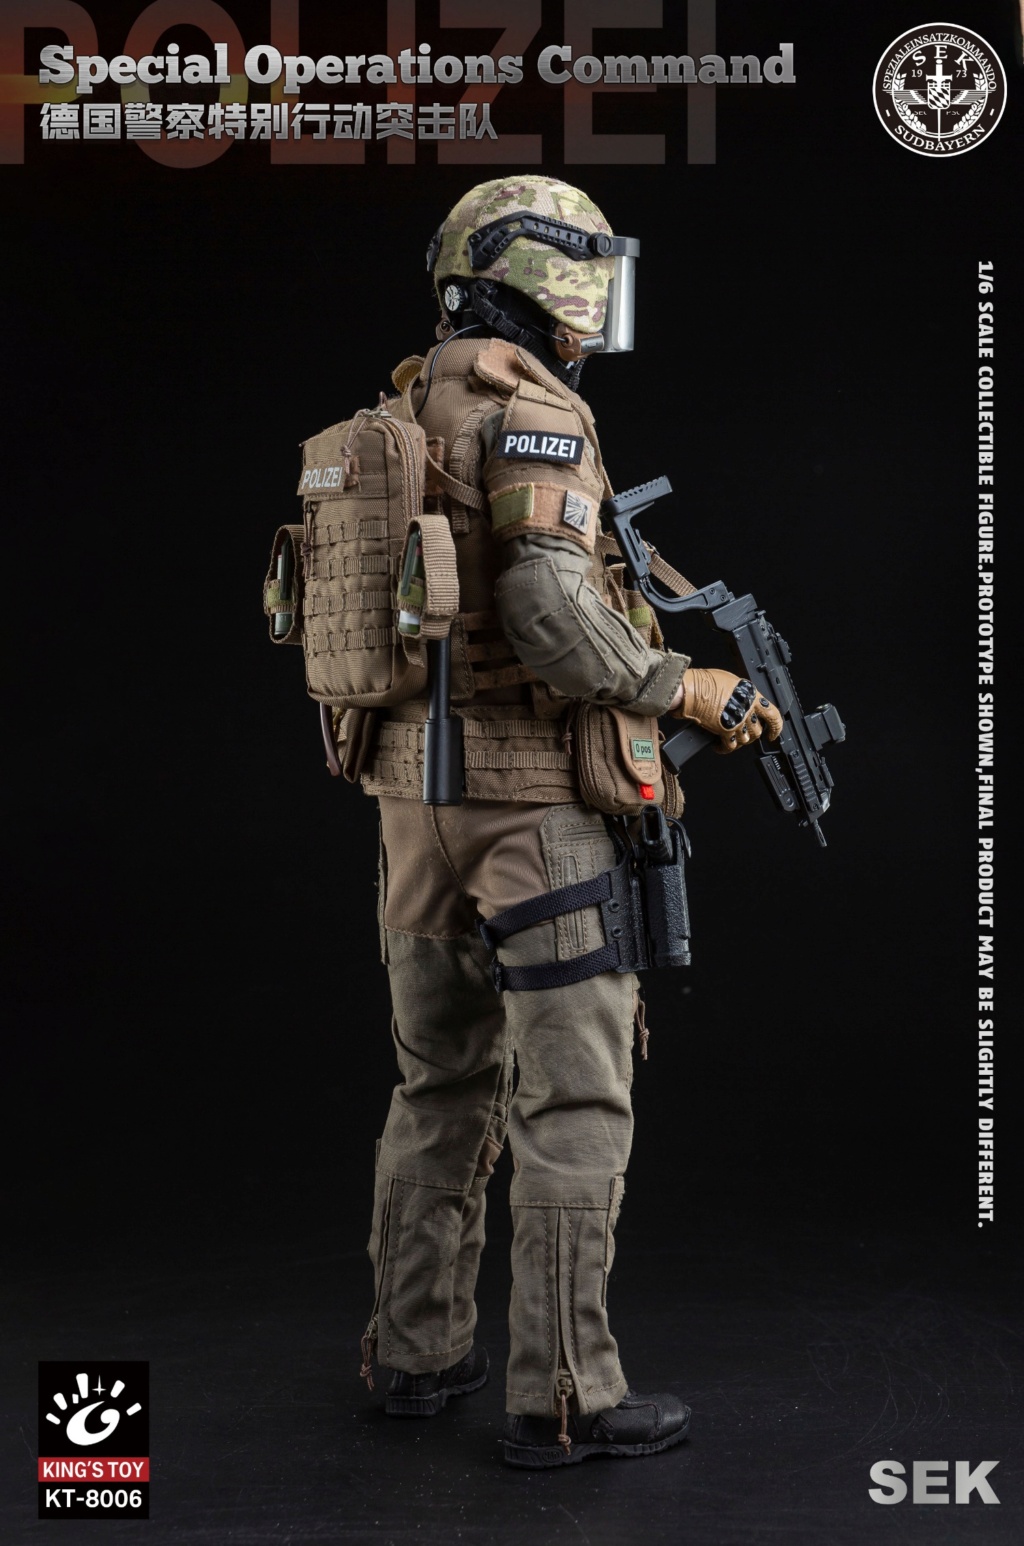 KT-8006 - NEW PRODUCT: King's Toy #KT-8006 1/6 Scale Special Operations Command SEK 09241111